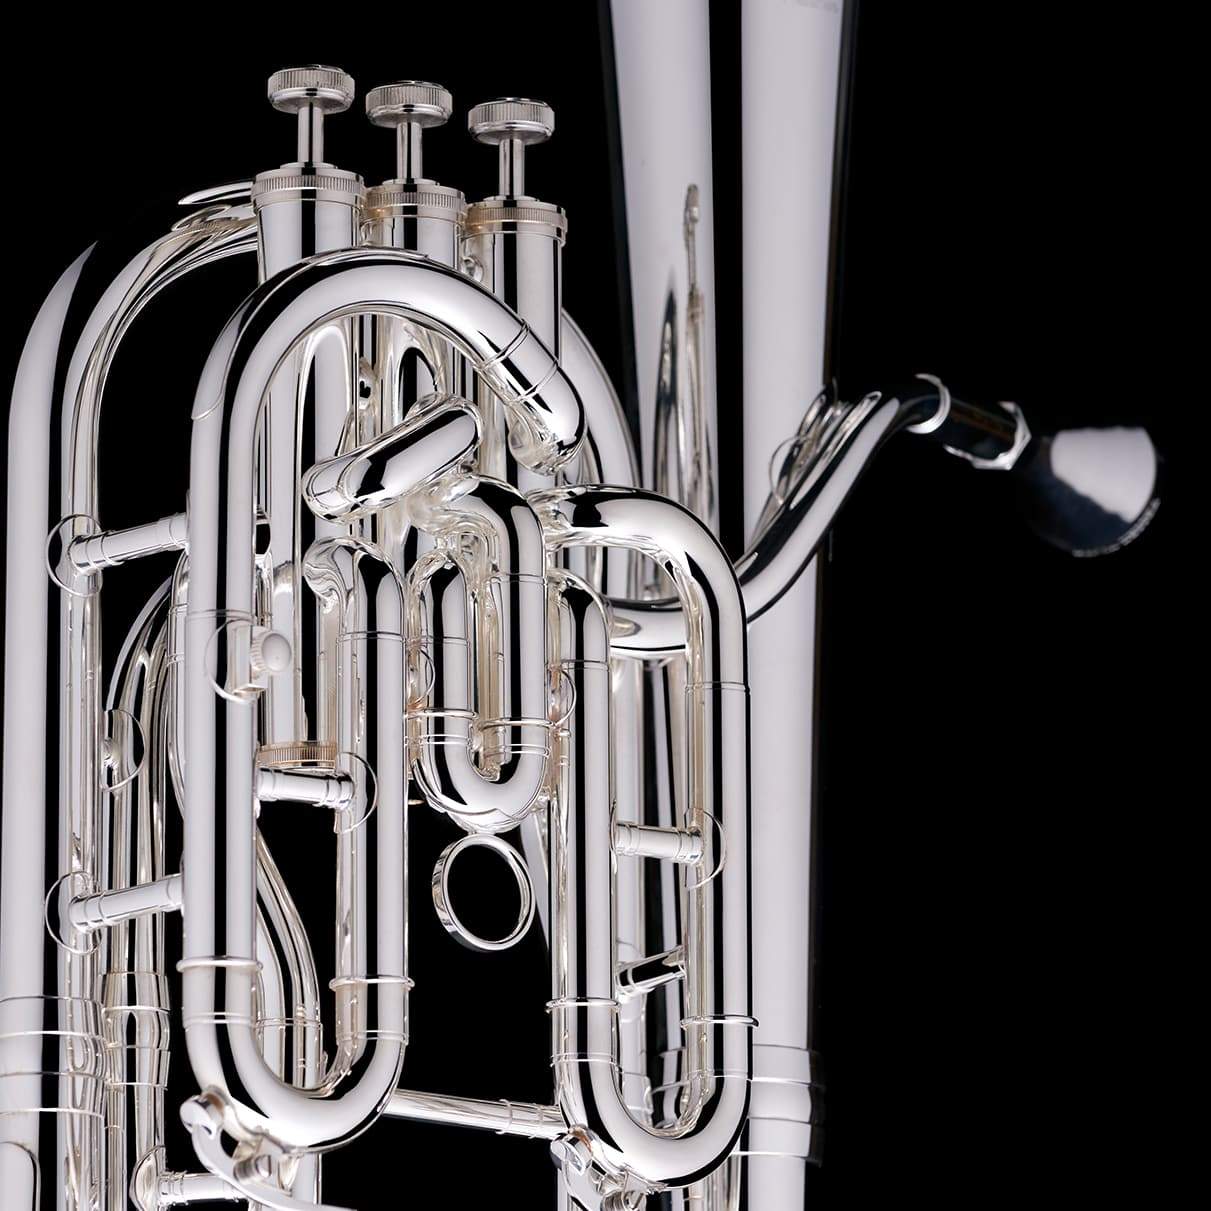 A close up image of the piston valves of a Bb Compensated Baritone (3-valve) from Wessex Tubas in silver-plate